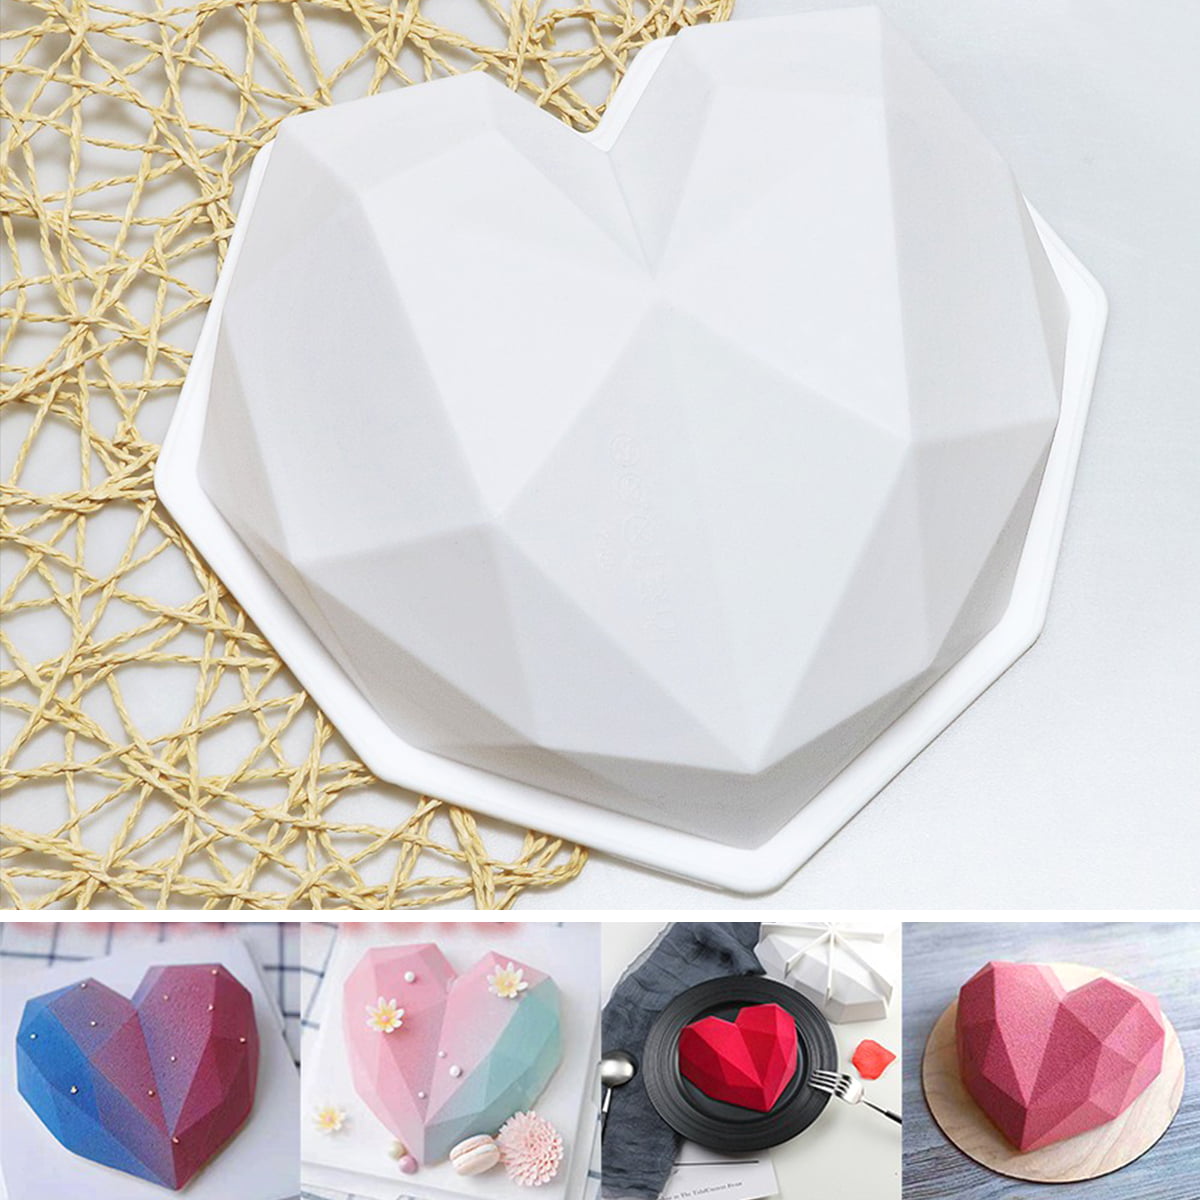 10x Silicone Heart Shape Cake Muffin Chocolate Candy Soap Mold Baking Mould 